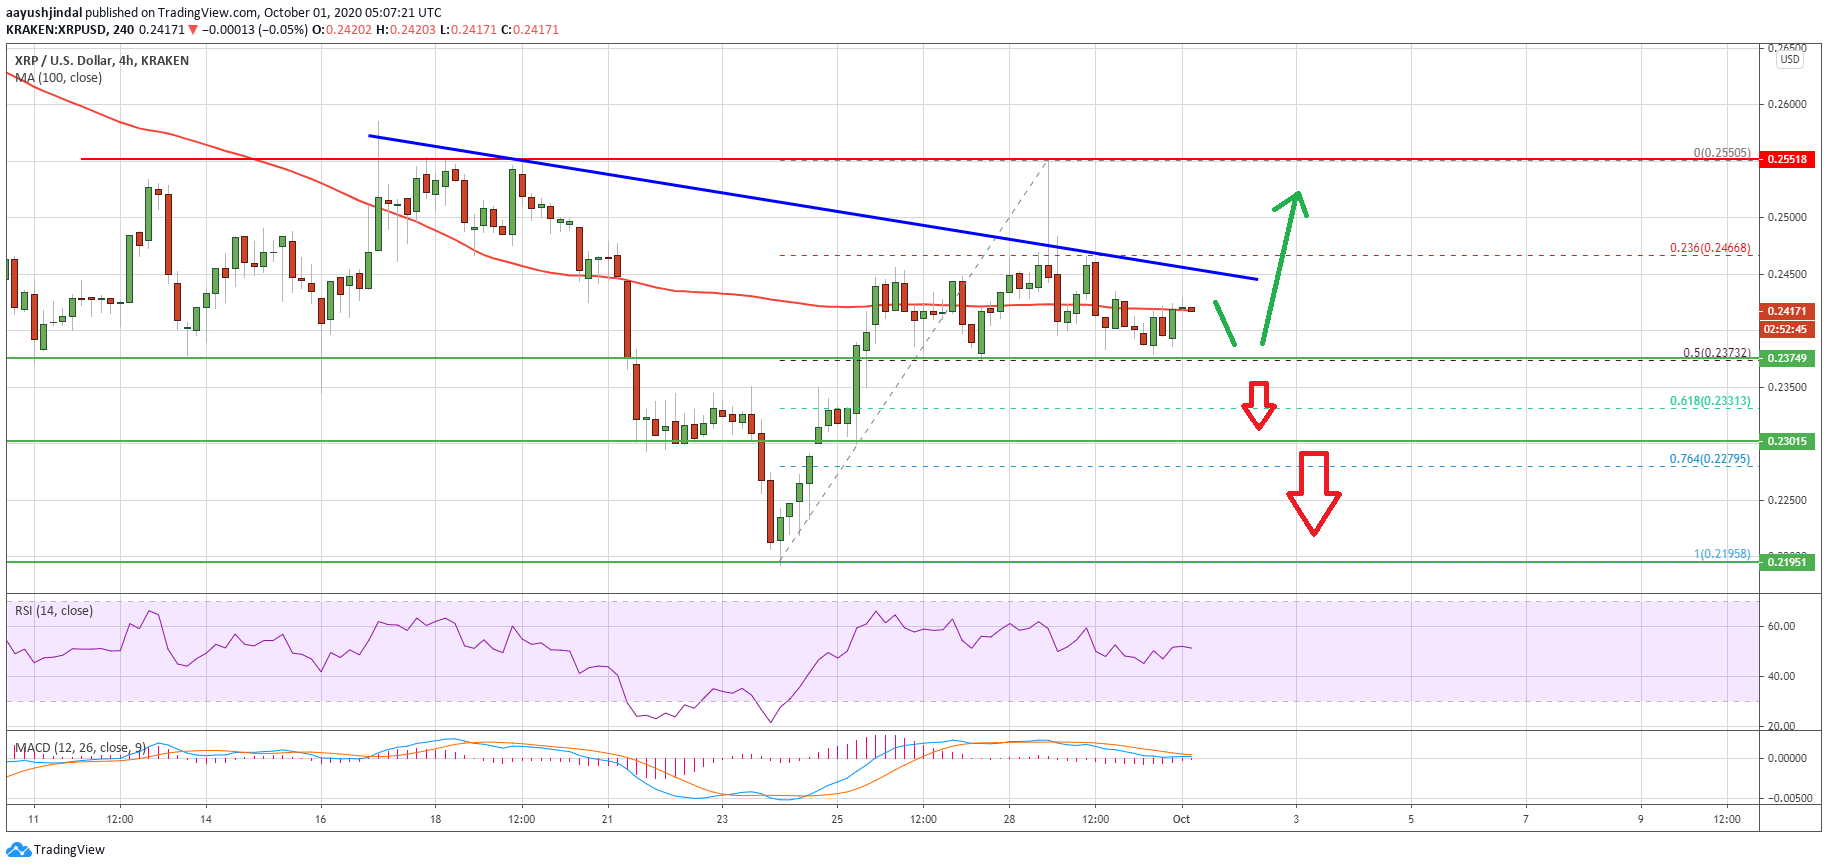 Ripple (XRP) Reaches Crucial Juncture: Technicals Suggest Crucial Breakout Pa...